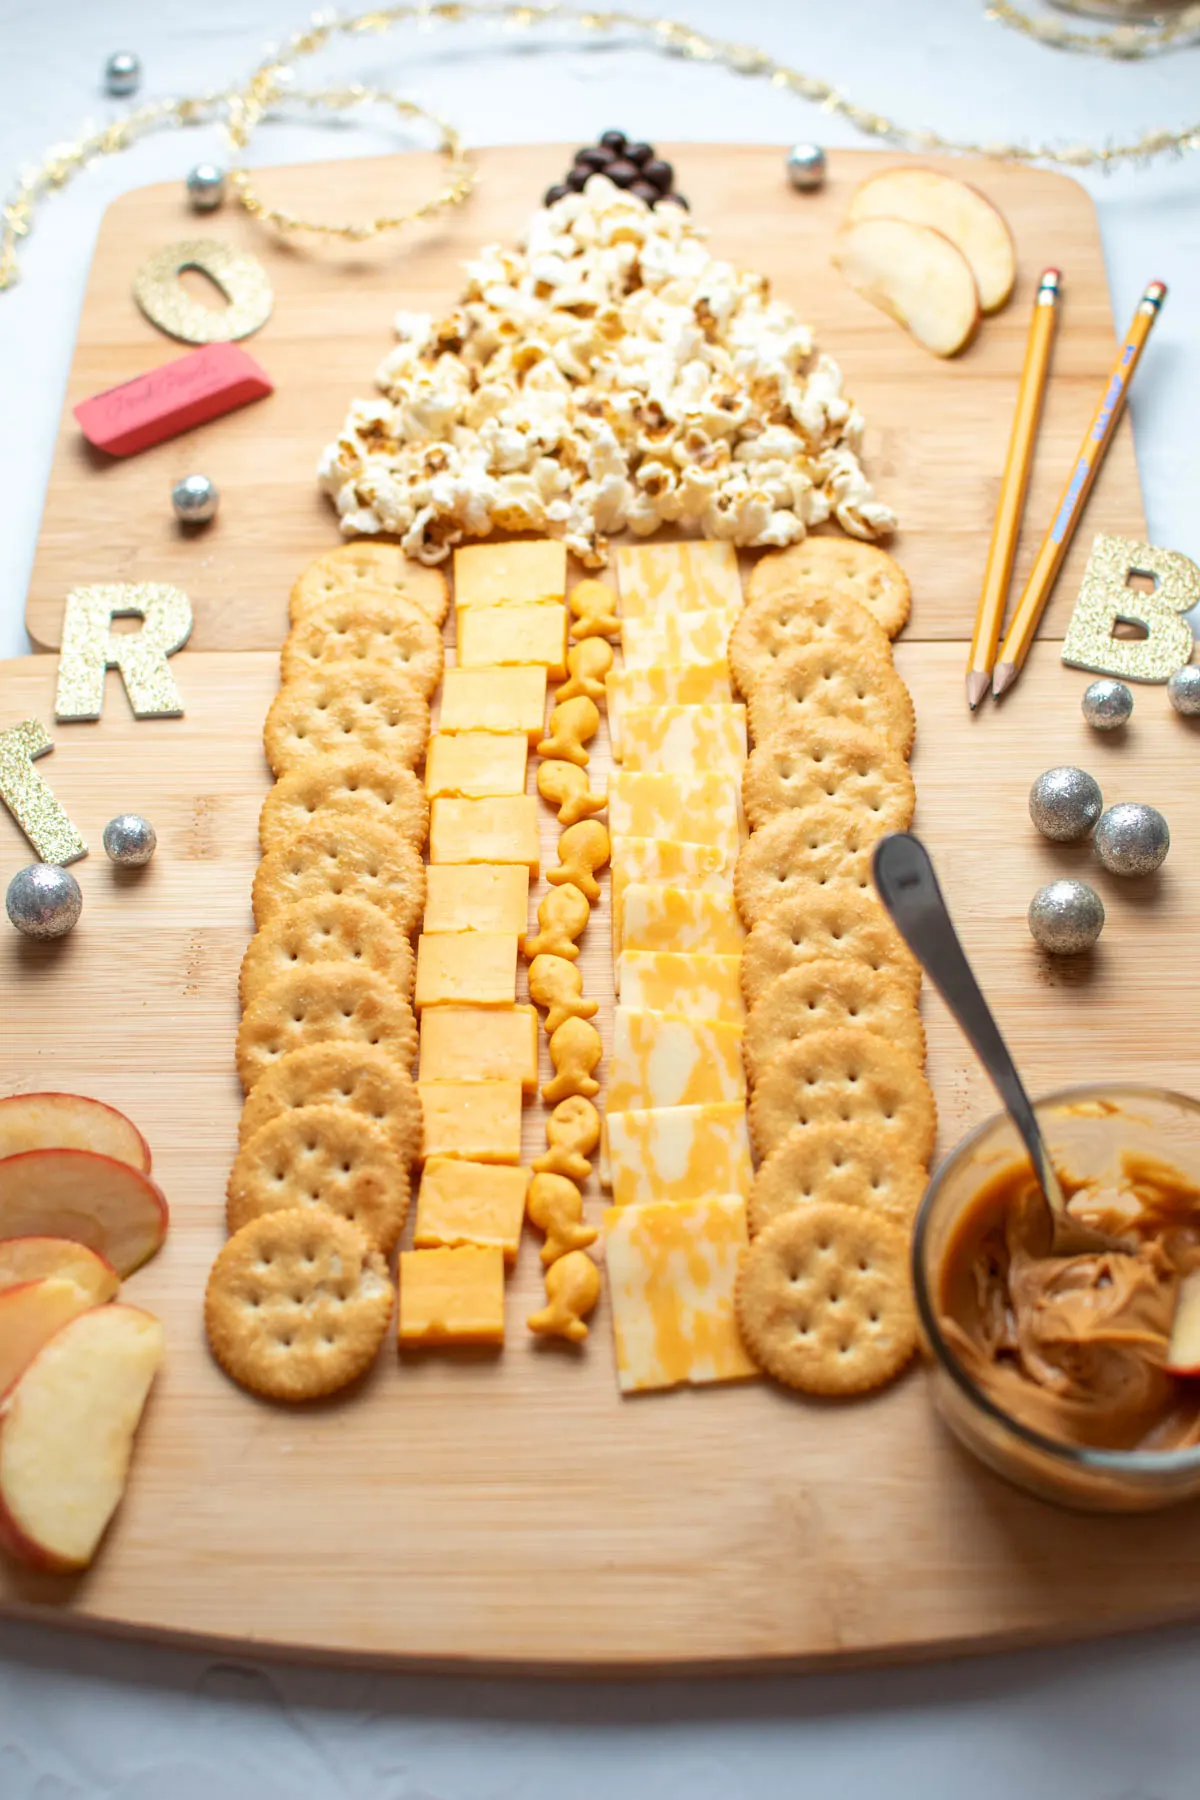 Back to school charcuterie board with cheese, crackers, popcorn, and raisins.